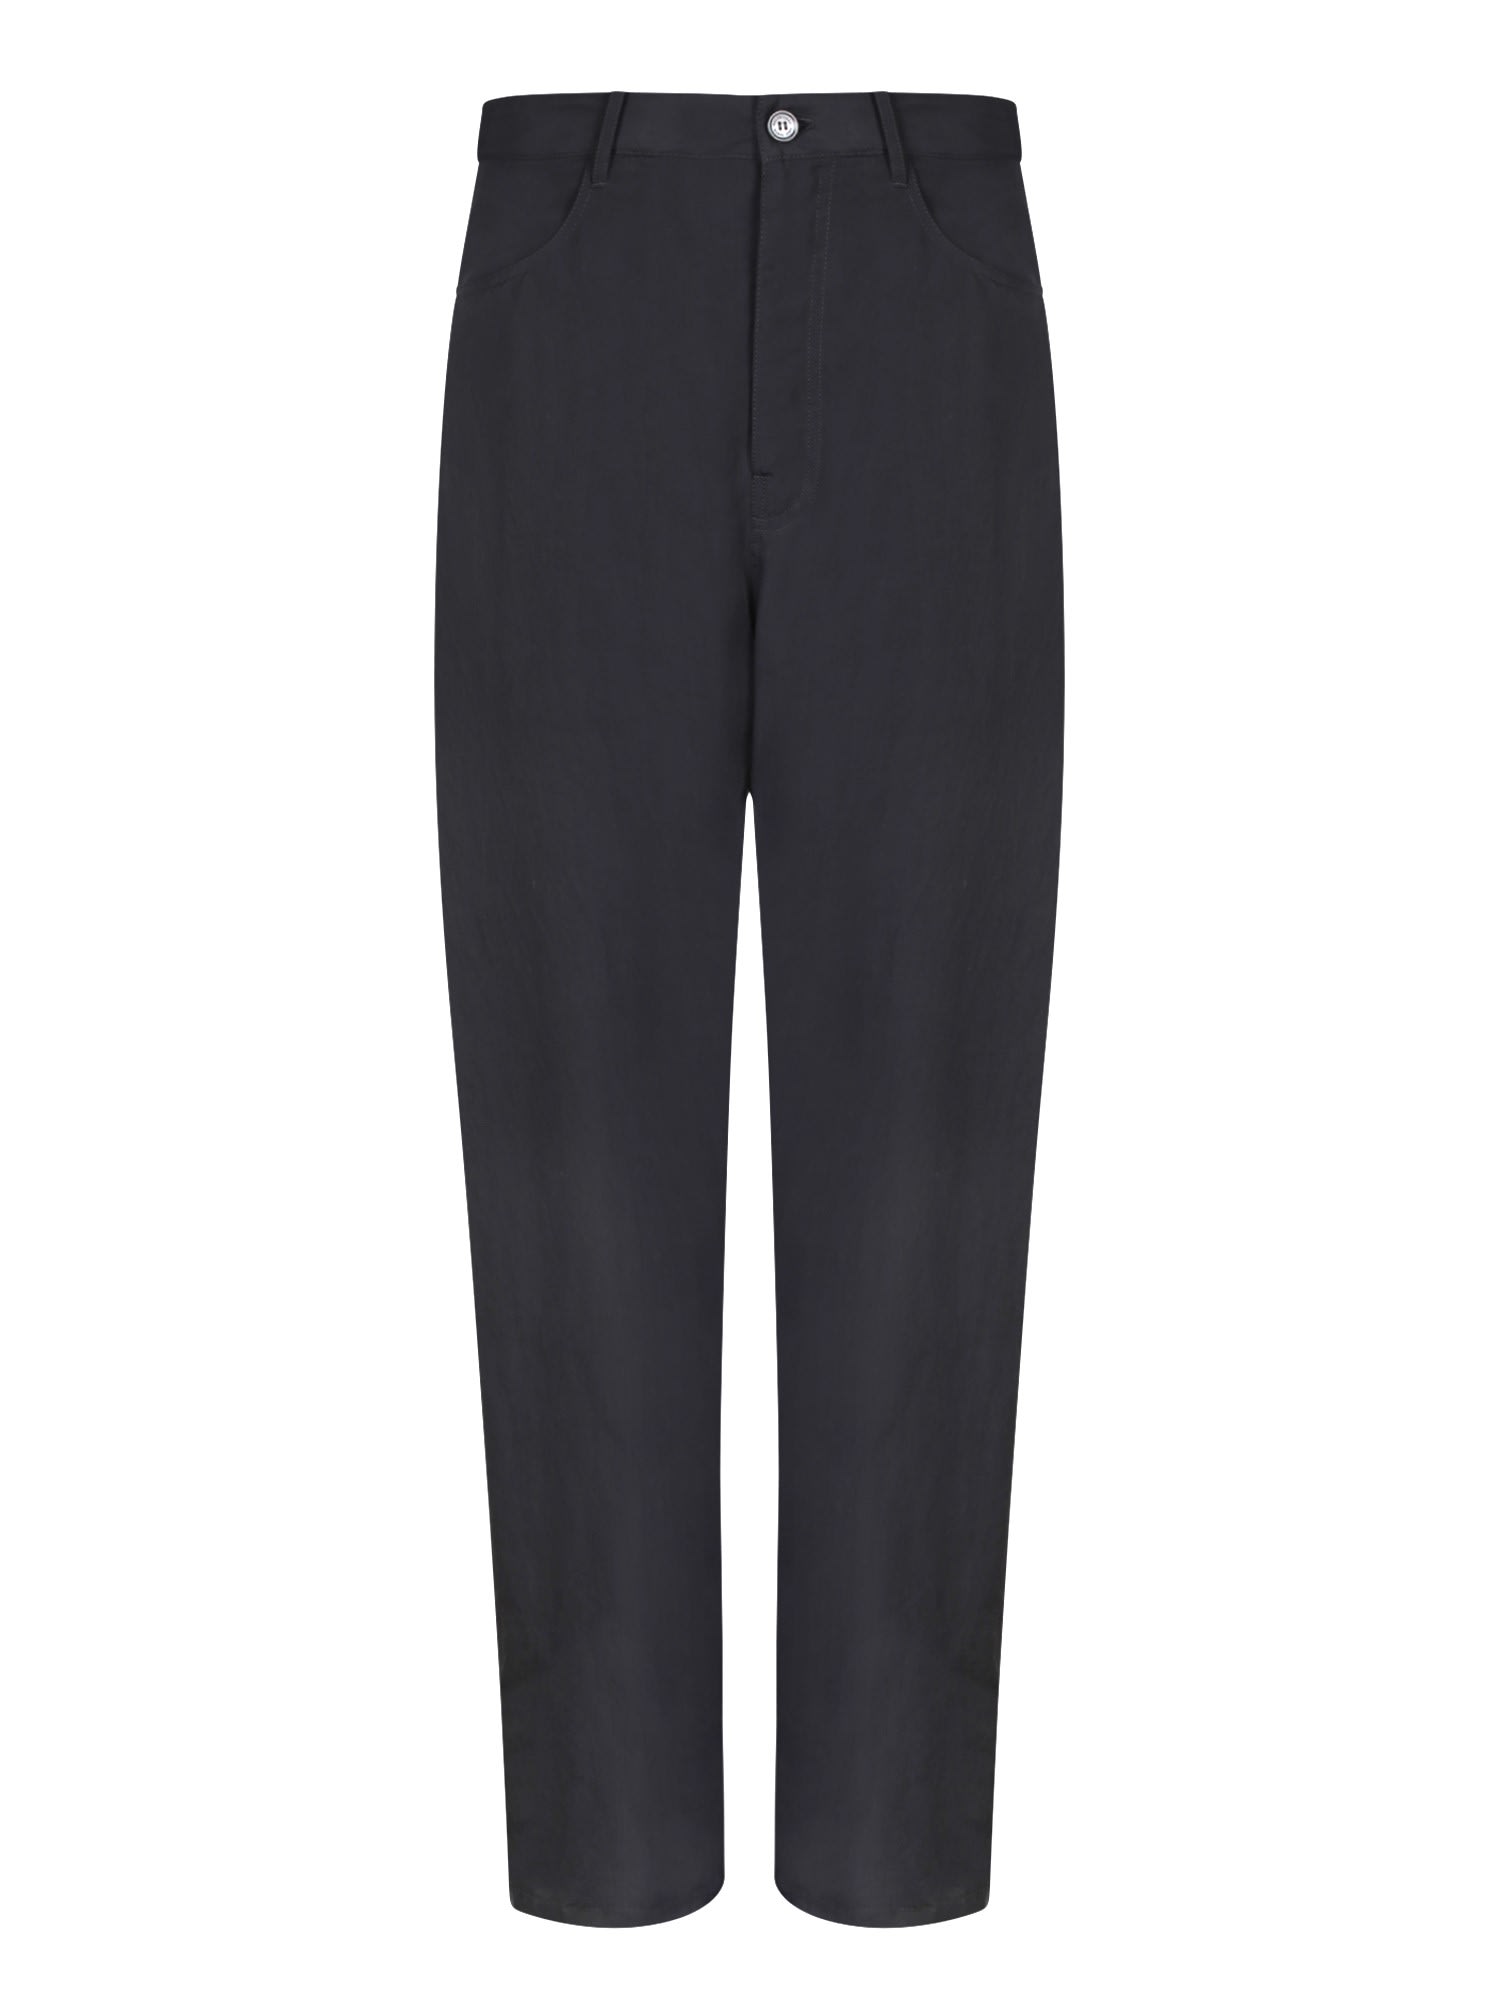 Baggy Black Trousers